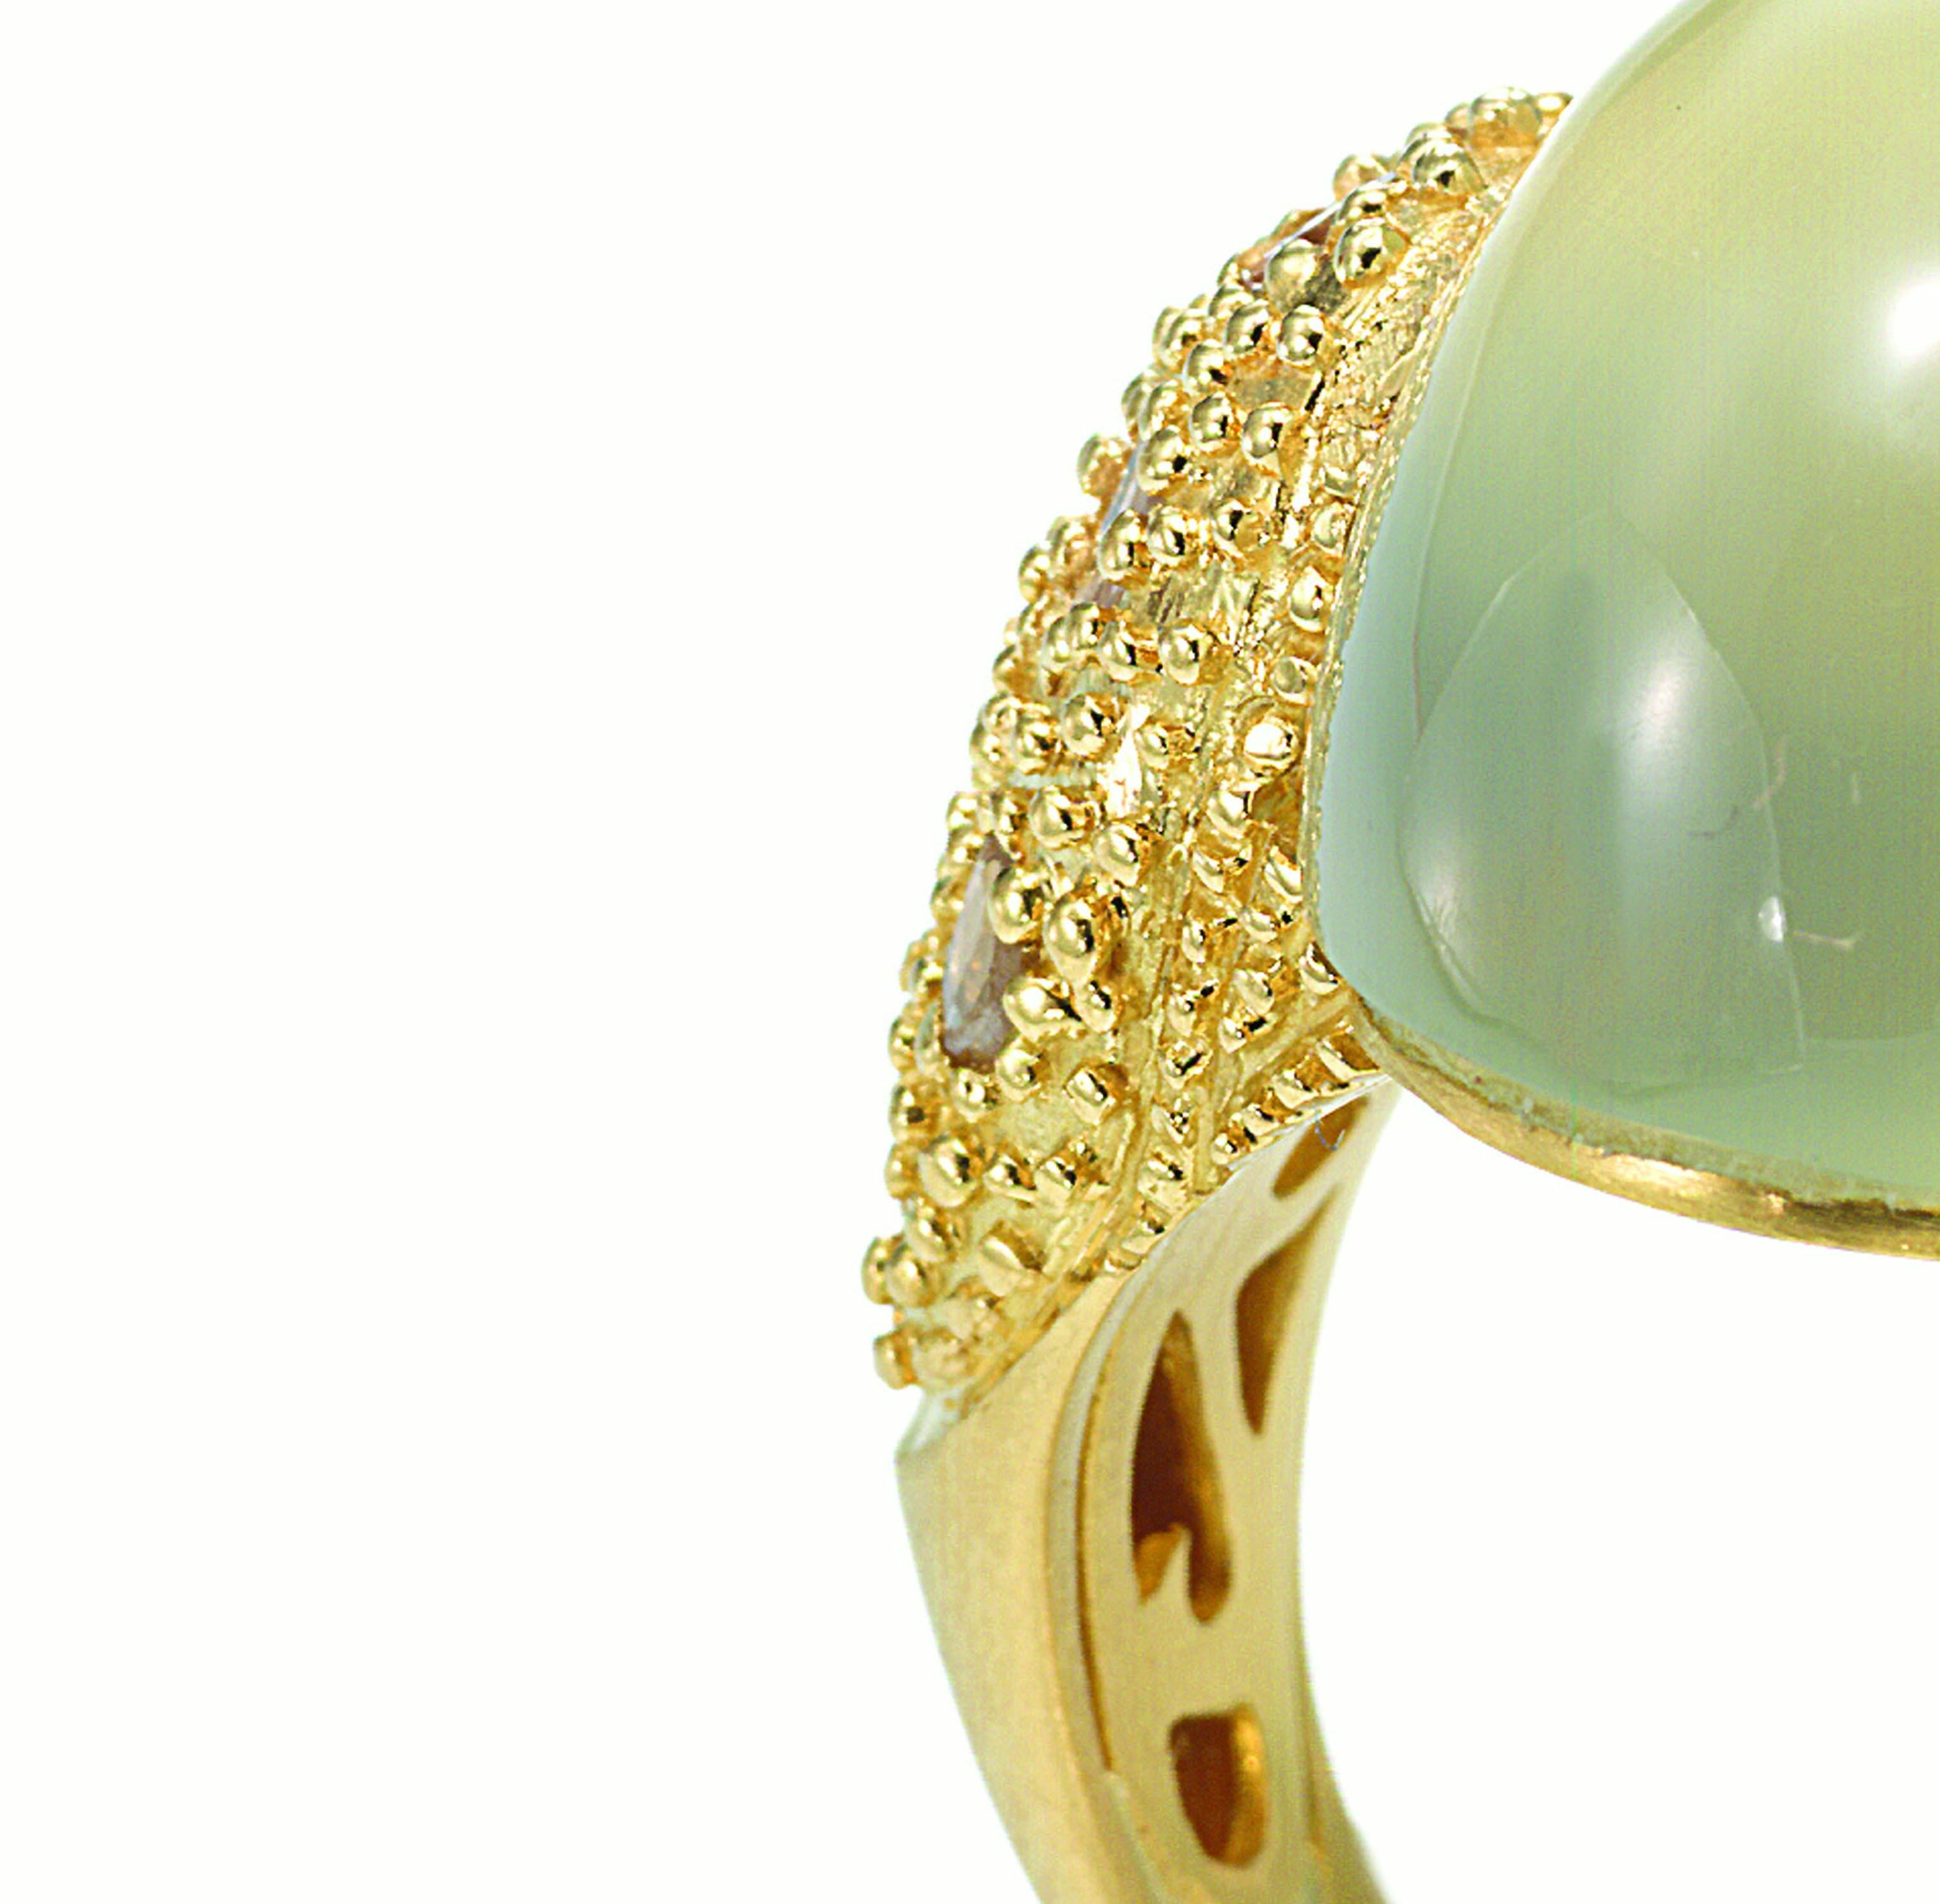 Eternity Cocktail Ring Set in 20 Karat Yellow Gold with 25.62 Carat Prehnite Centerstone and 0.84 Carat Rose-Cut Diamond Accents.

Custom Ring Size Available Upon Request*